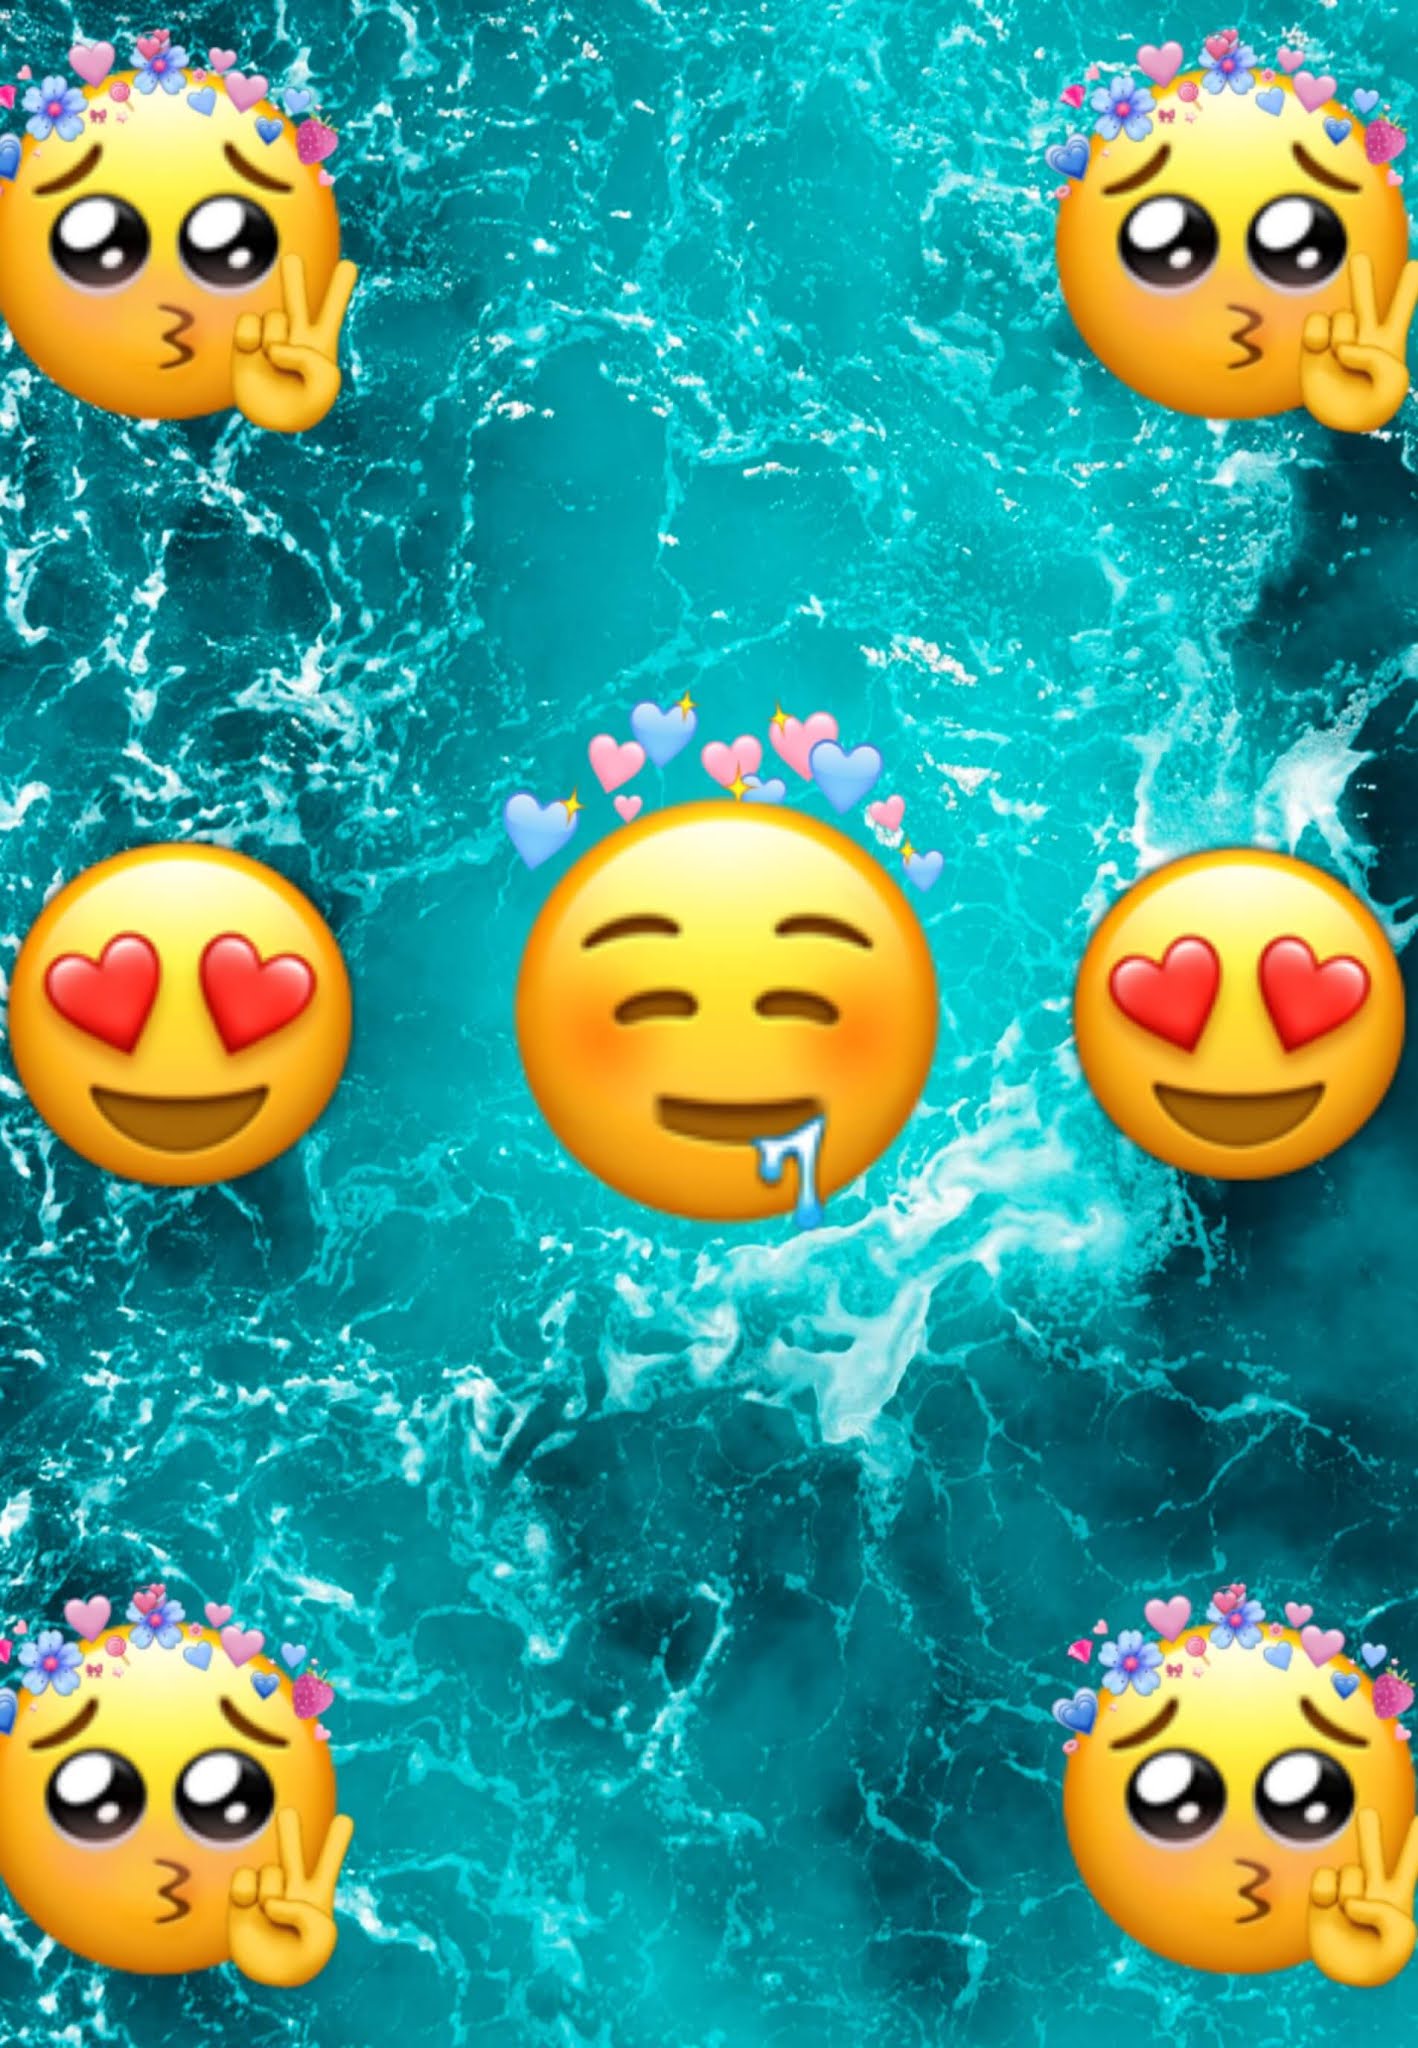 Emoji wallpaper image photo picture free download wishes image